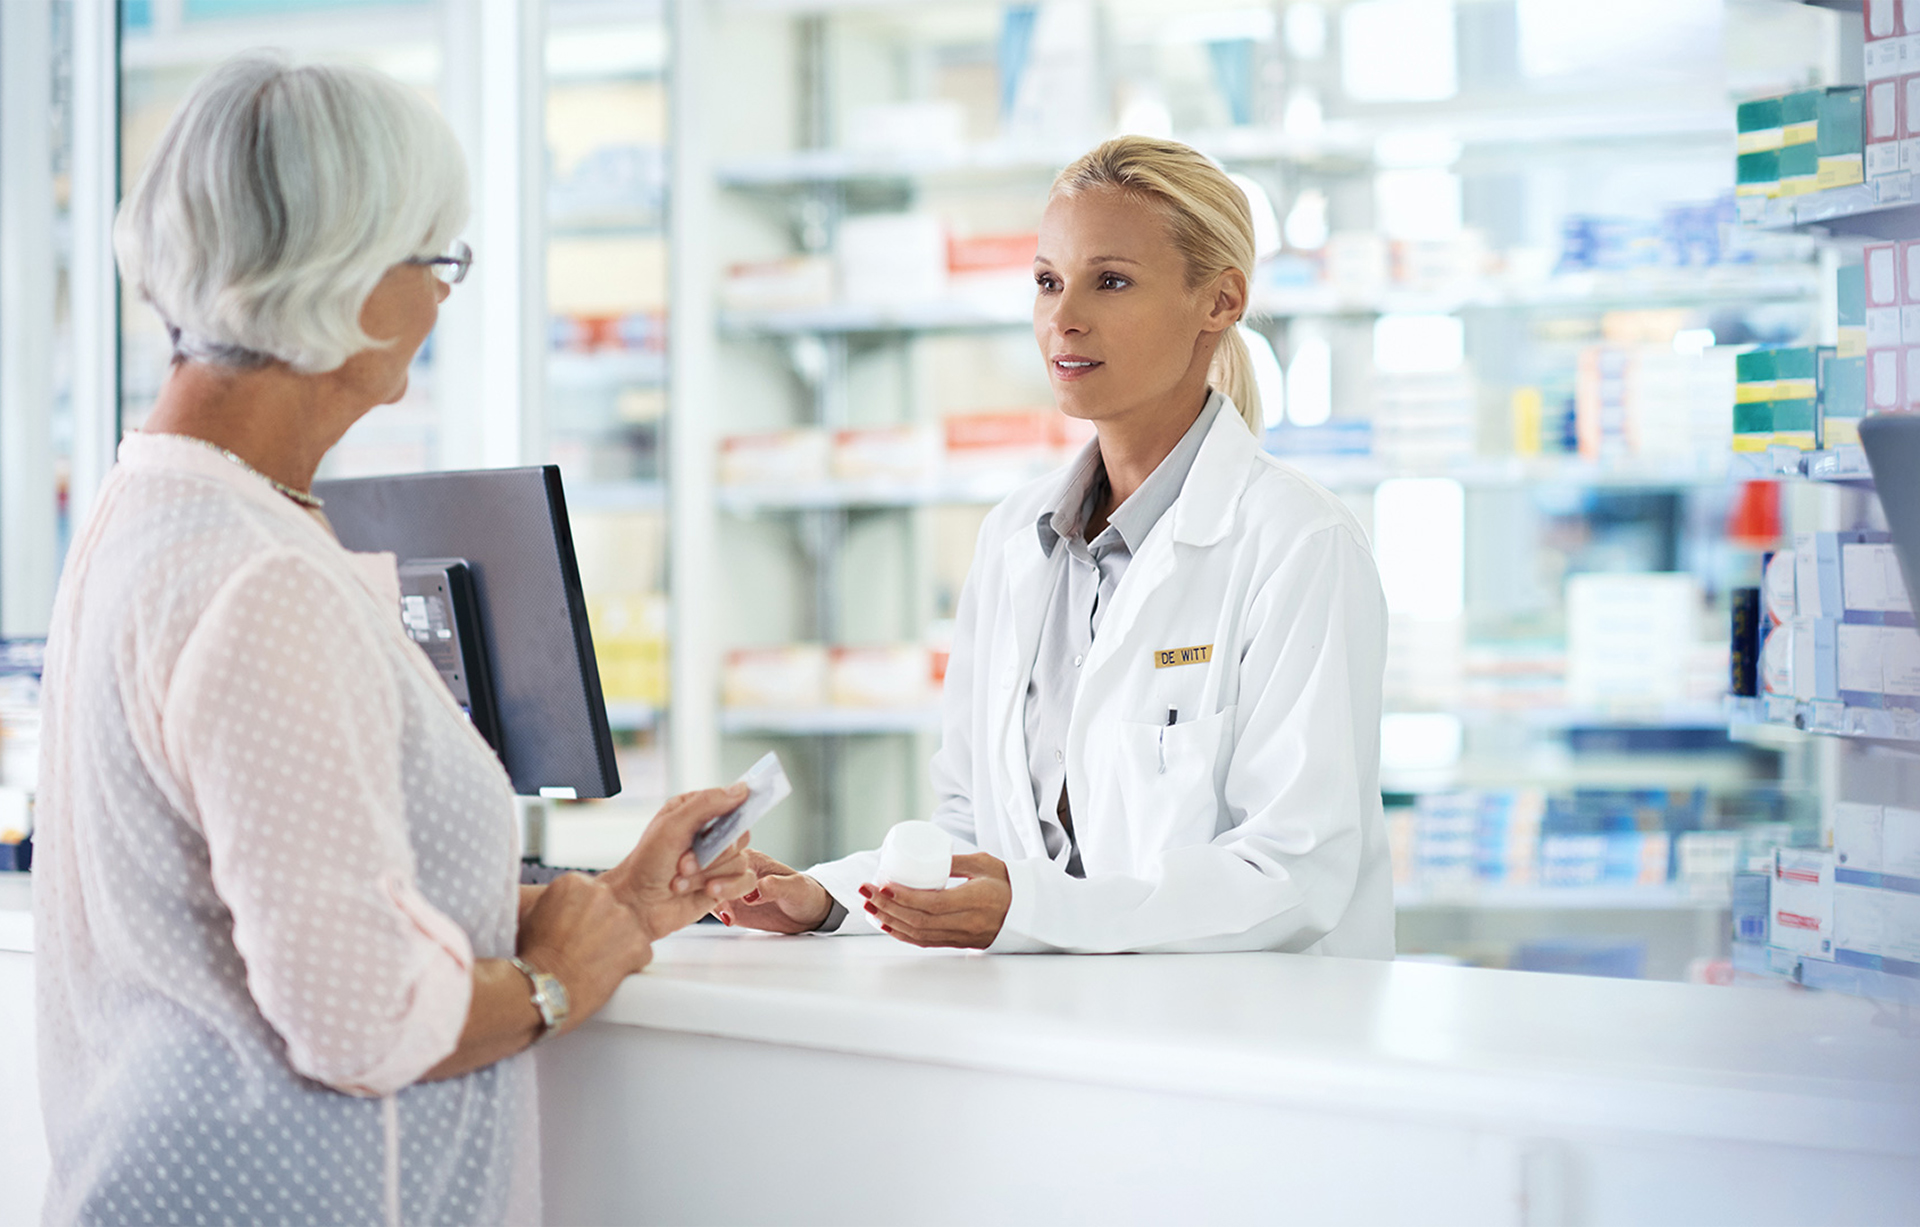 How to Save Your Clients Money on Prescription Drugs